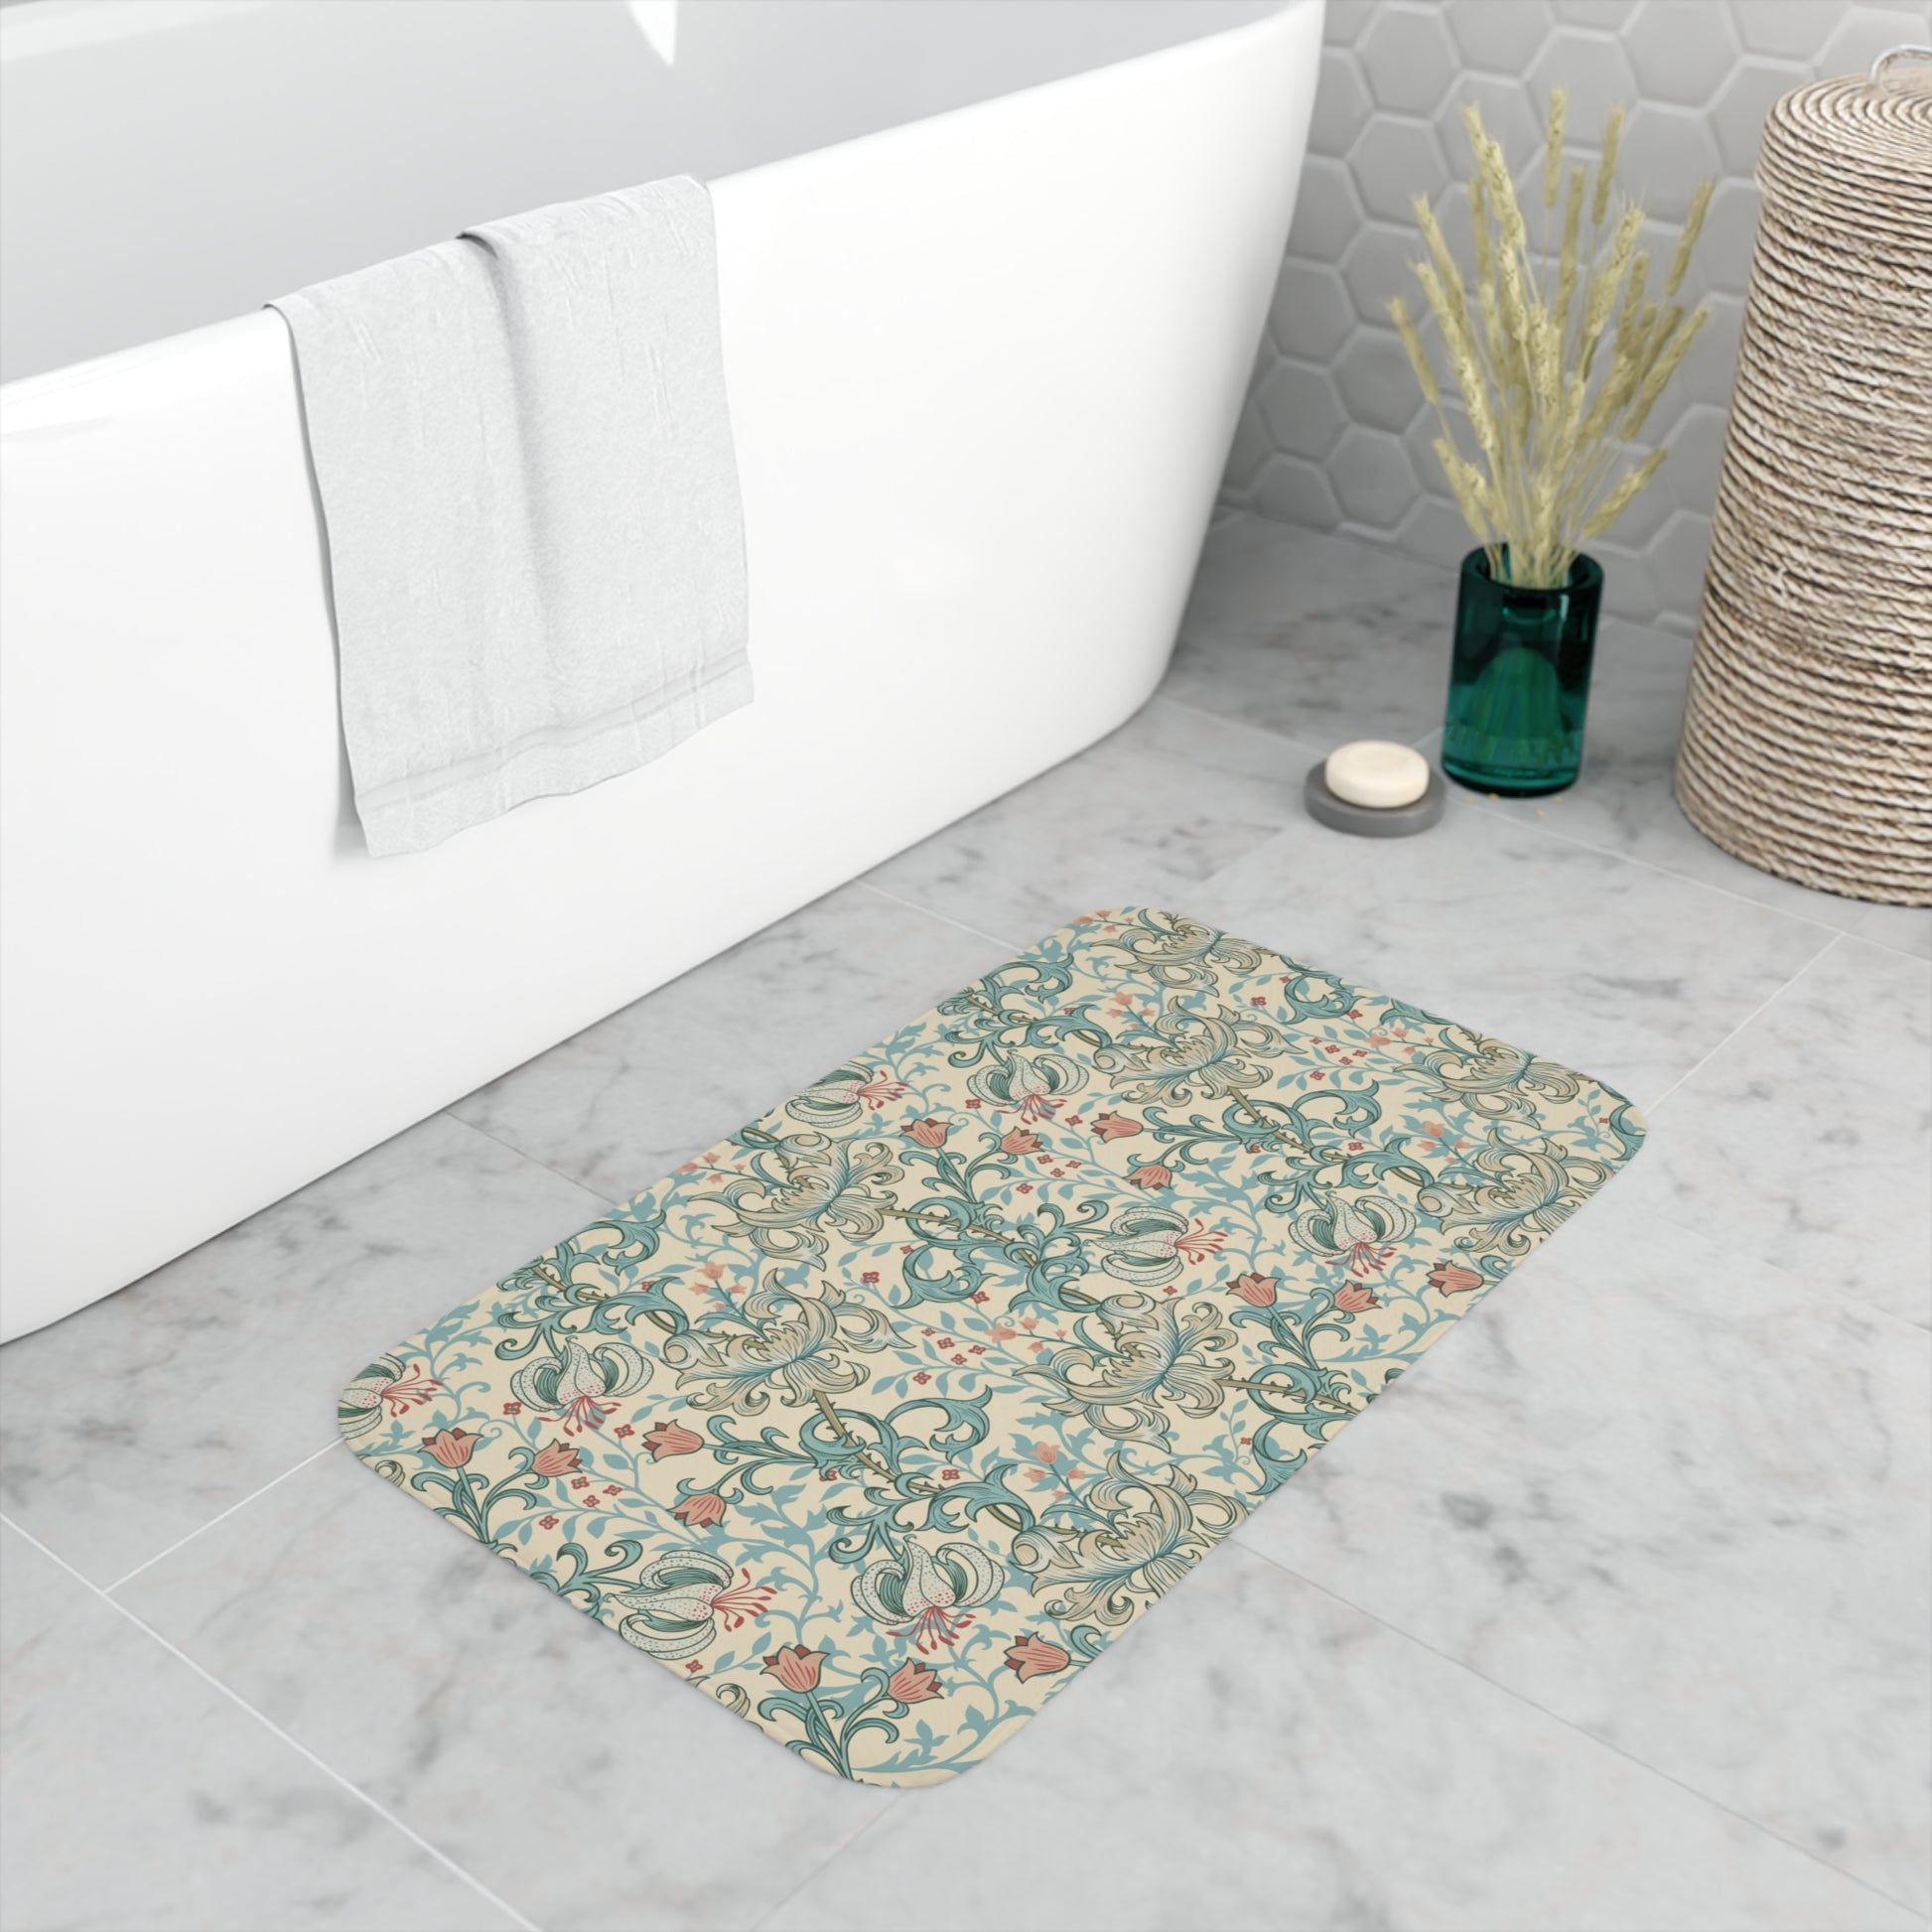 william-morris-co-memory-foam-bath-mat-golden-lily-collection-mineral-6